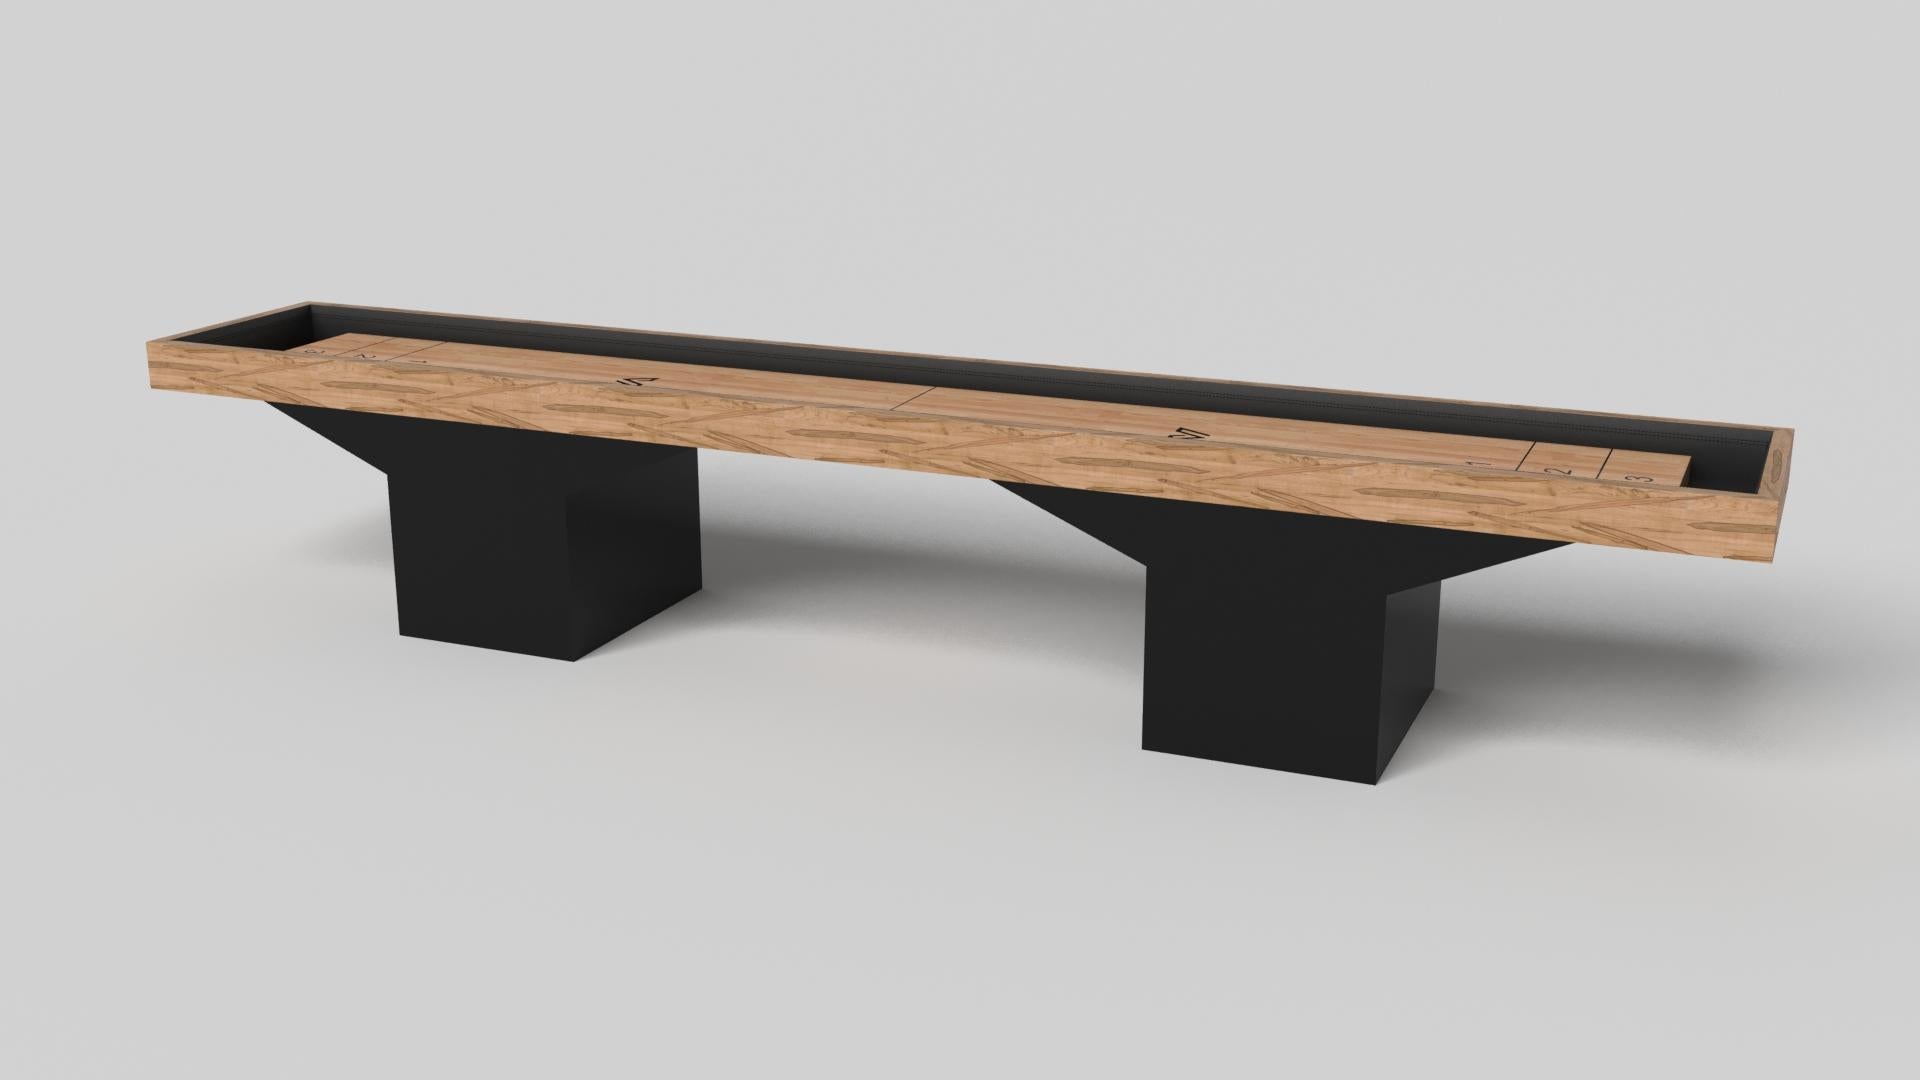 Minimalist design meets opulent elegance in the Trestle shuffleboard table. Detailed with a professional surface for endless game play, this contemporary table is expertly crafted. Square block legs give it a stark, geometric look that contributes